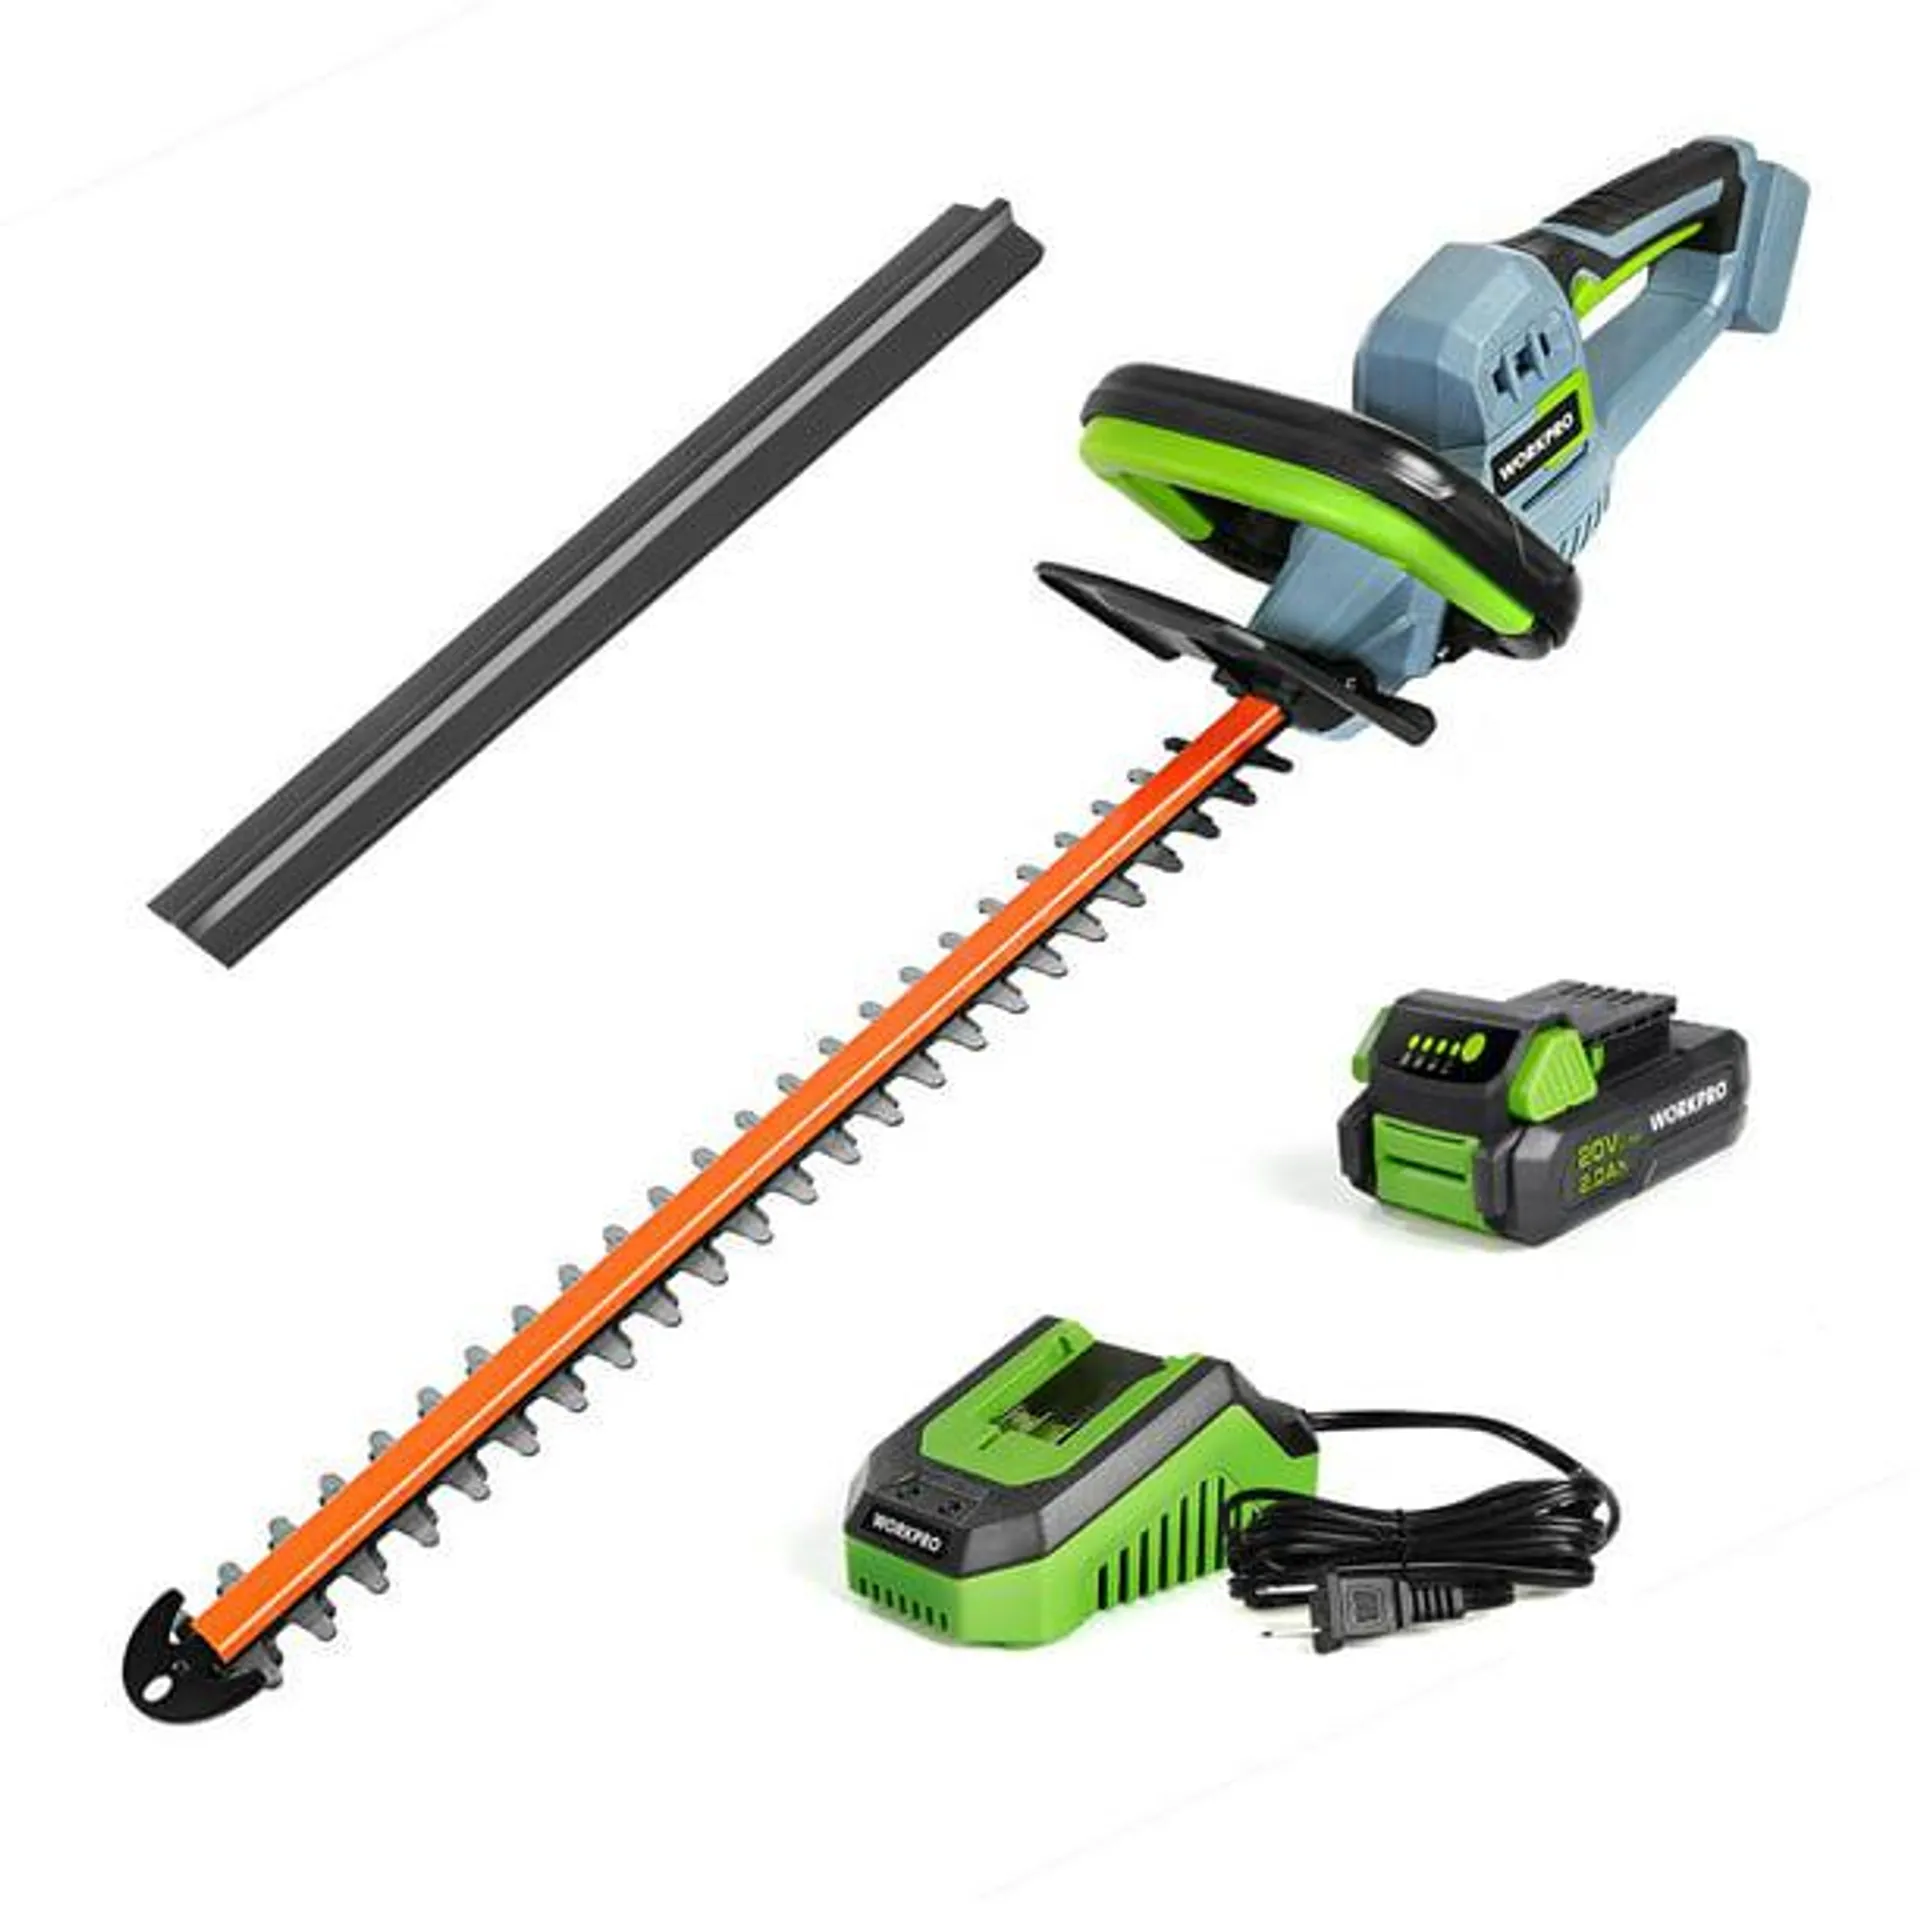 WORKPRO 20V Cordless Hedge Trimmer, 20" Dual Action Blades Electric Hedge Trimmer, with Battery and Charger